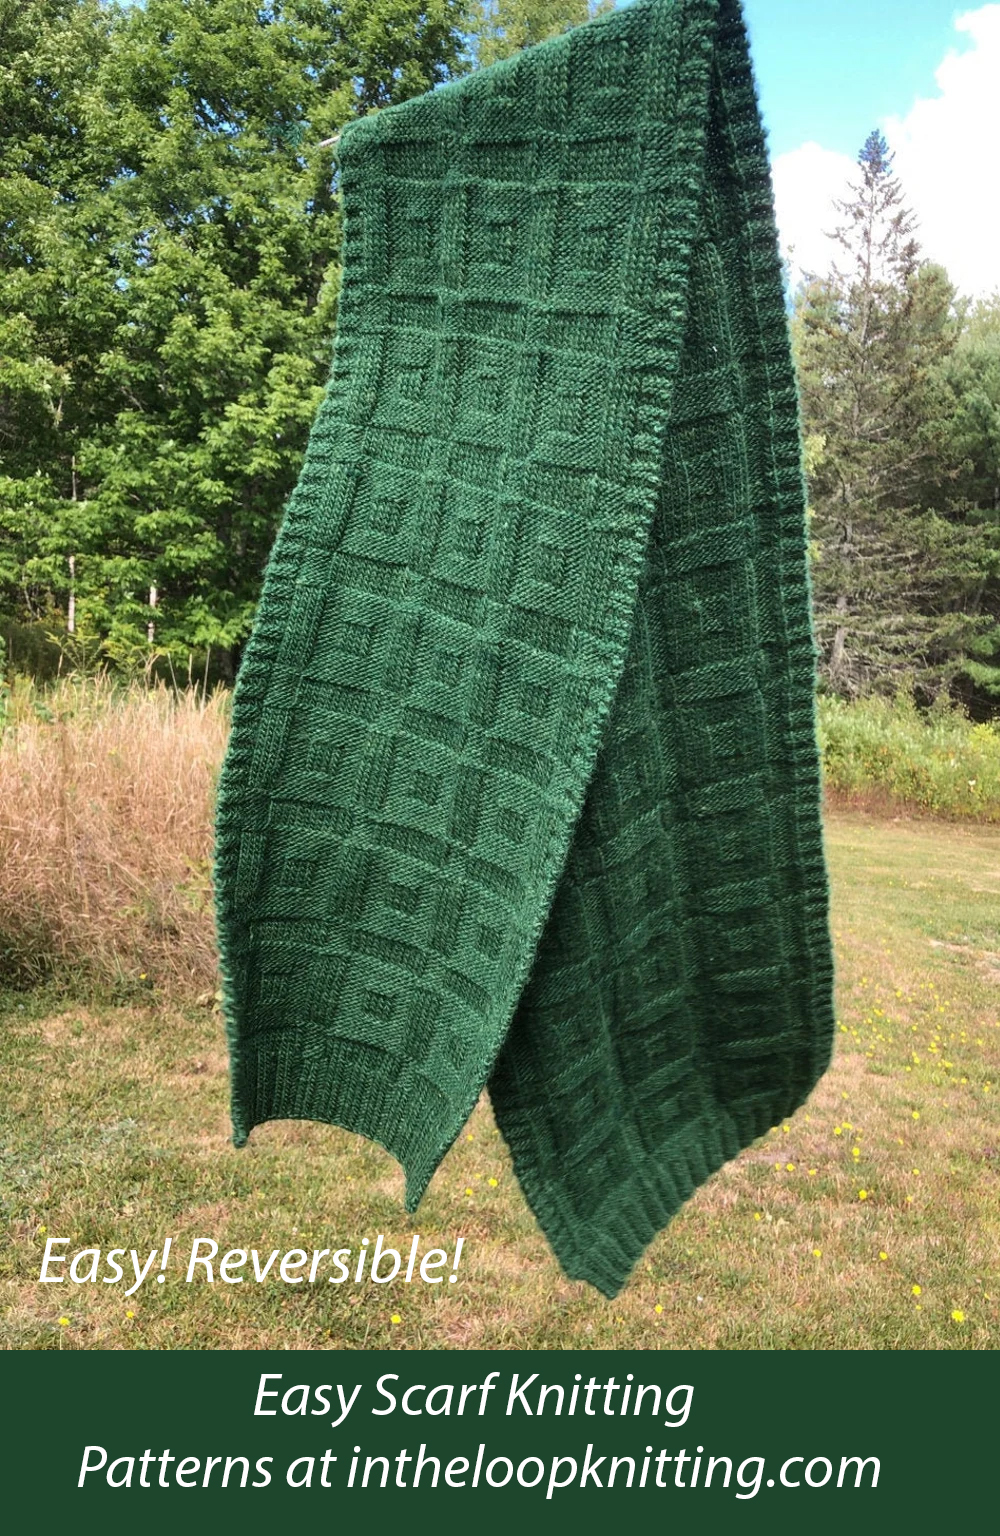 Easy Square Deal Reversible Scarf Knitting Pattern